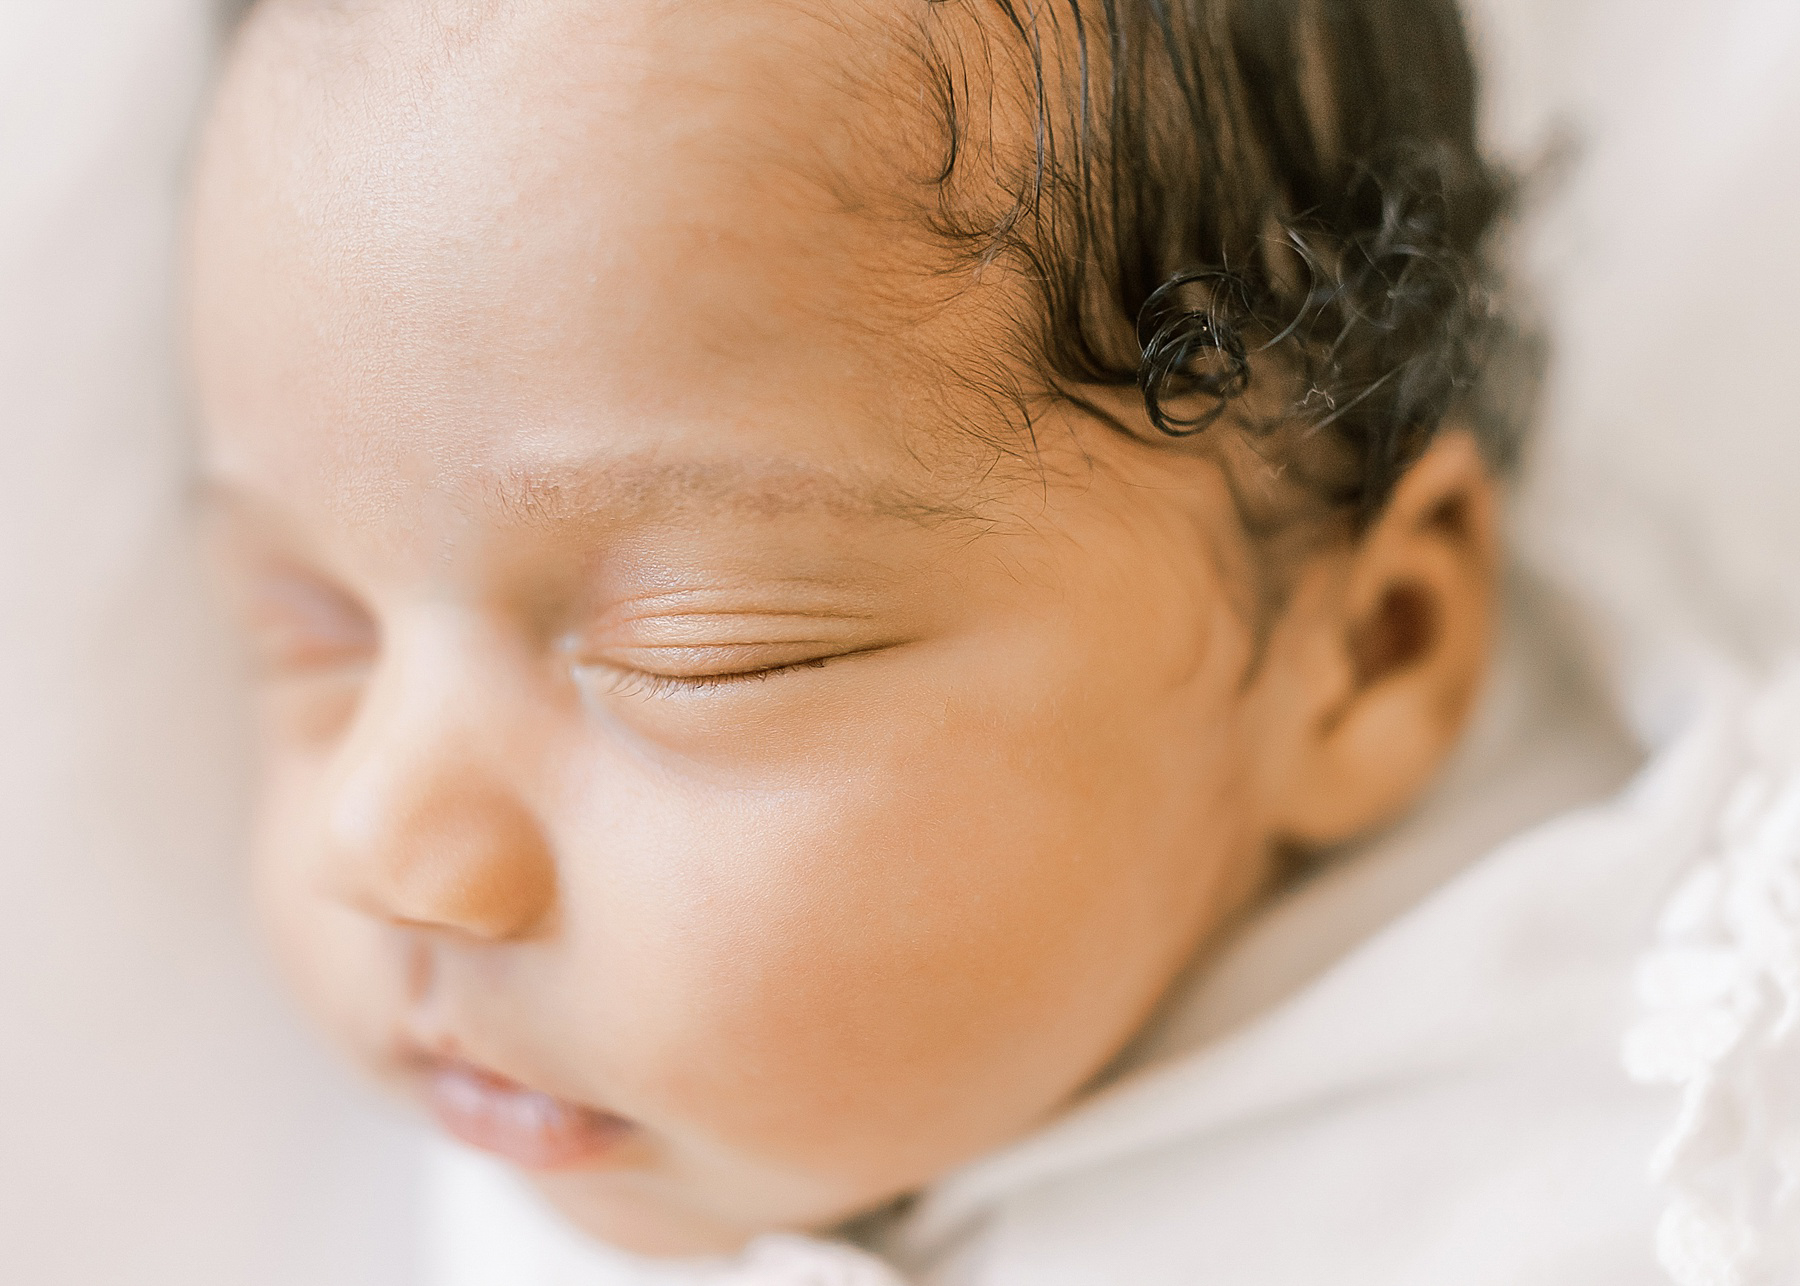 newborn baby girl close up of face with curly black hair